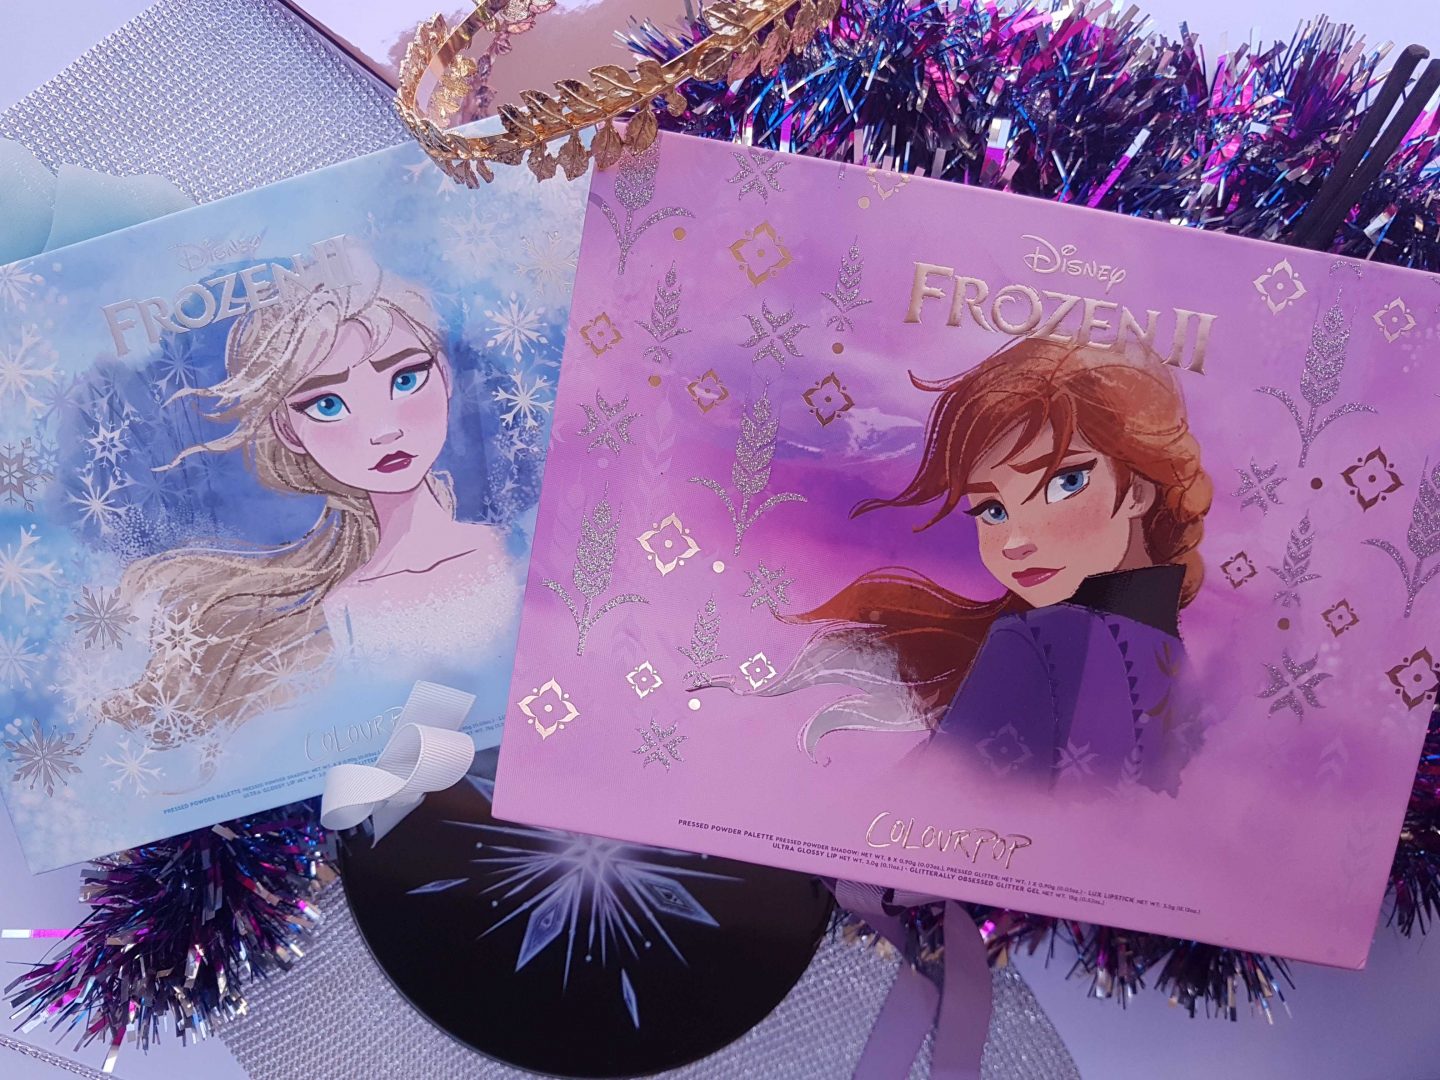 Frozen II collection by Colourpop